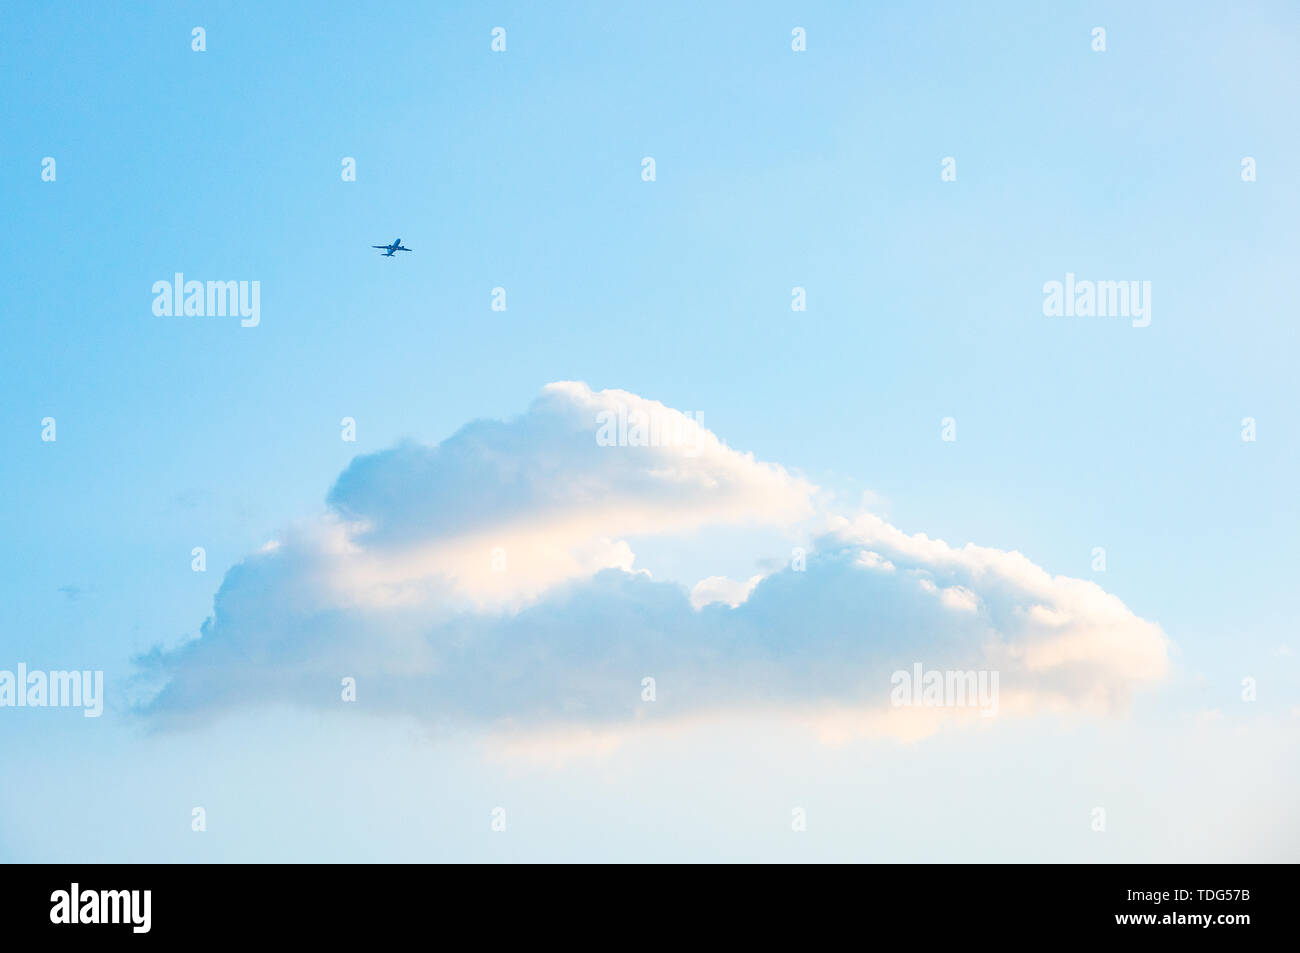 The plane on the blue sky and white clouds. Stock Photo